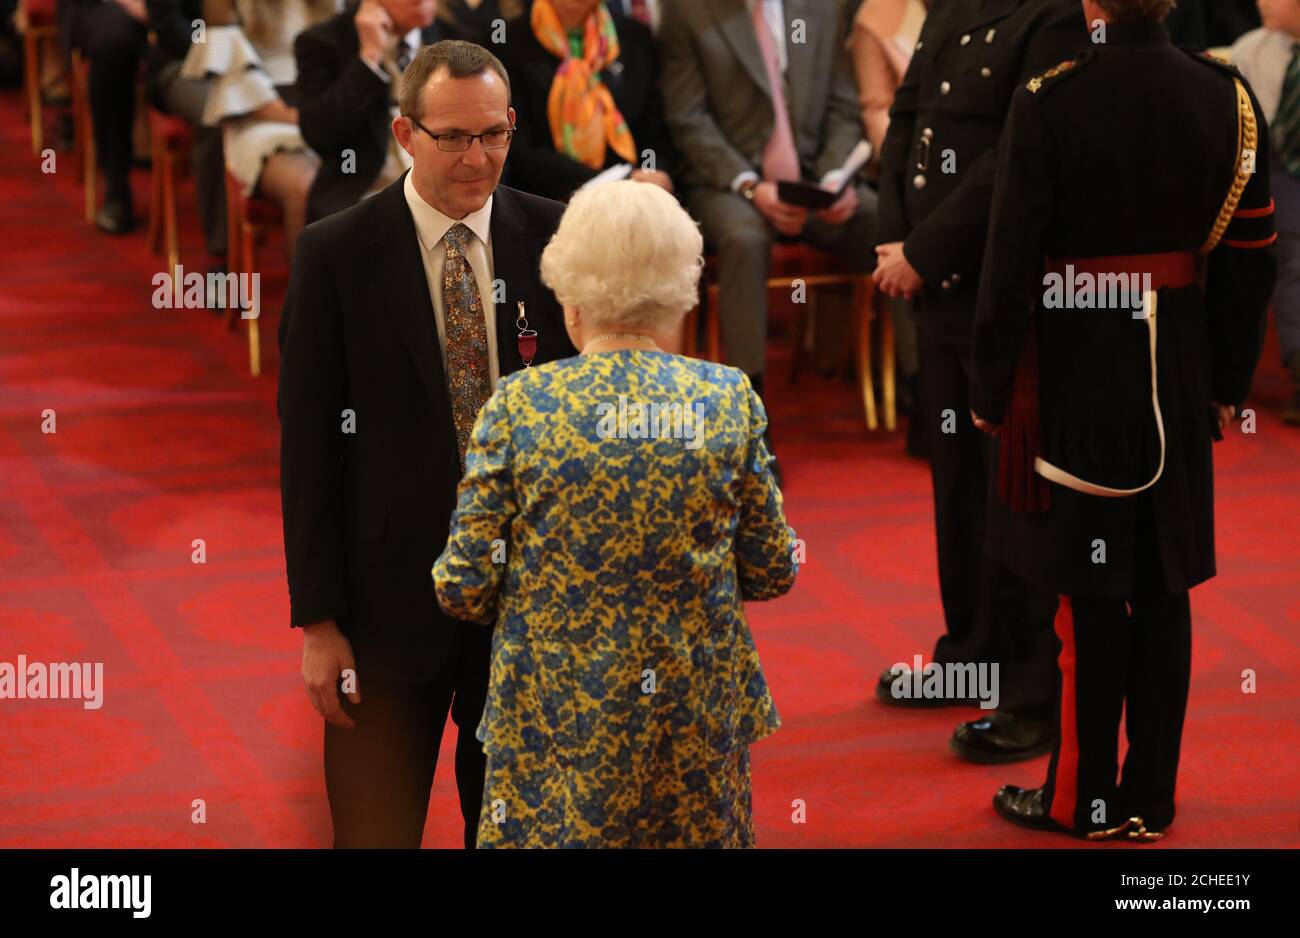 Diver John Volanthen receives the George Medal for his part in the Thai cave rescue from Queen Elizabeth II during an investiture ceremony at Buckingham Palace, London. Stock Photo